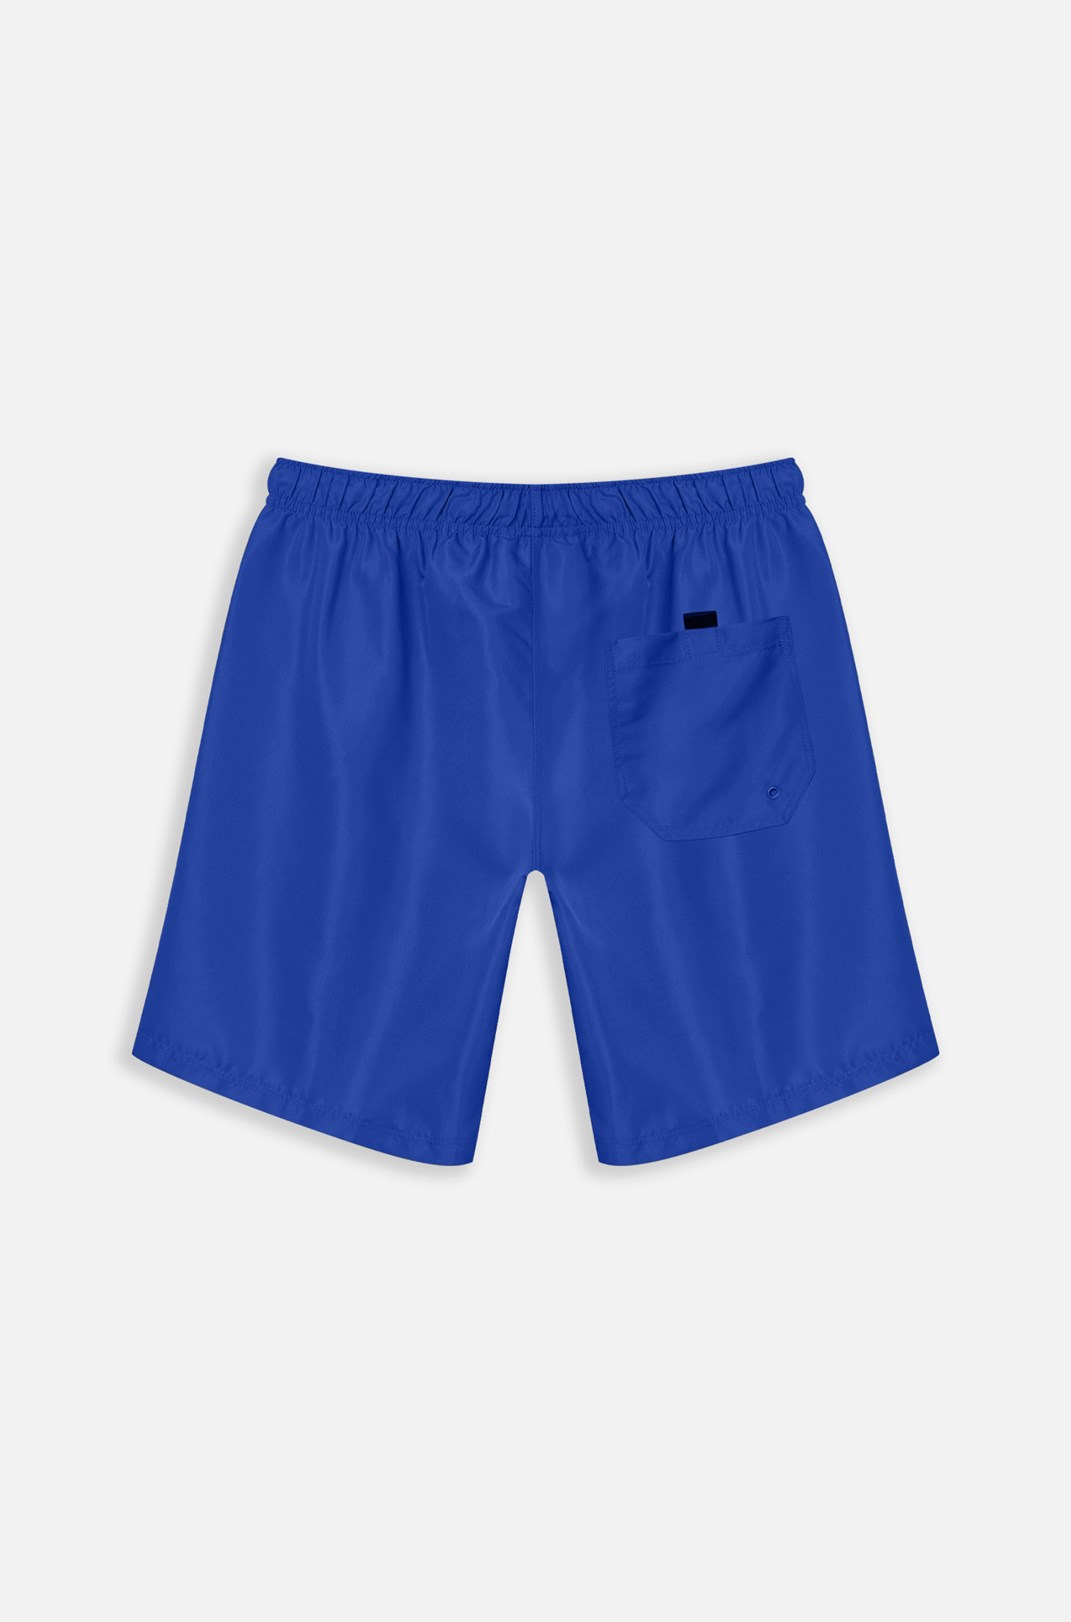 Shorts 7inches Approve Workwear Plus Azul